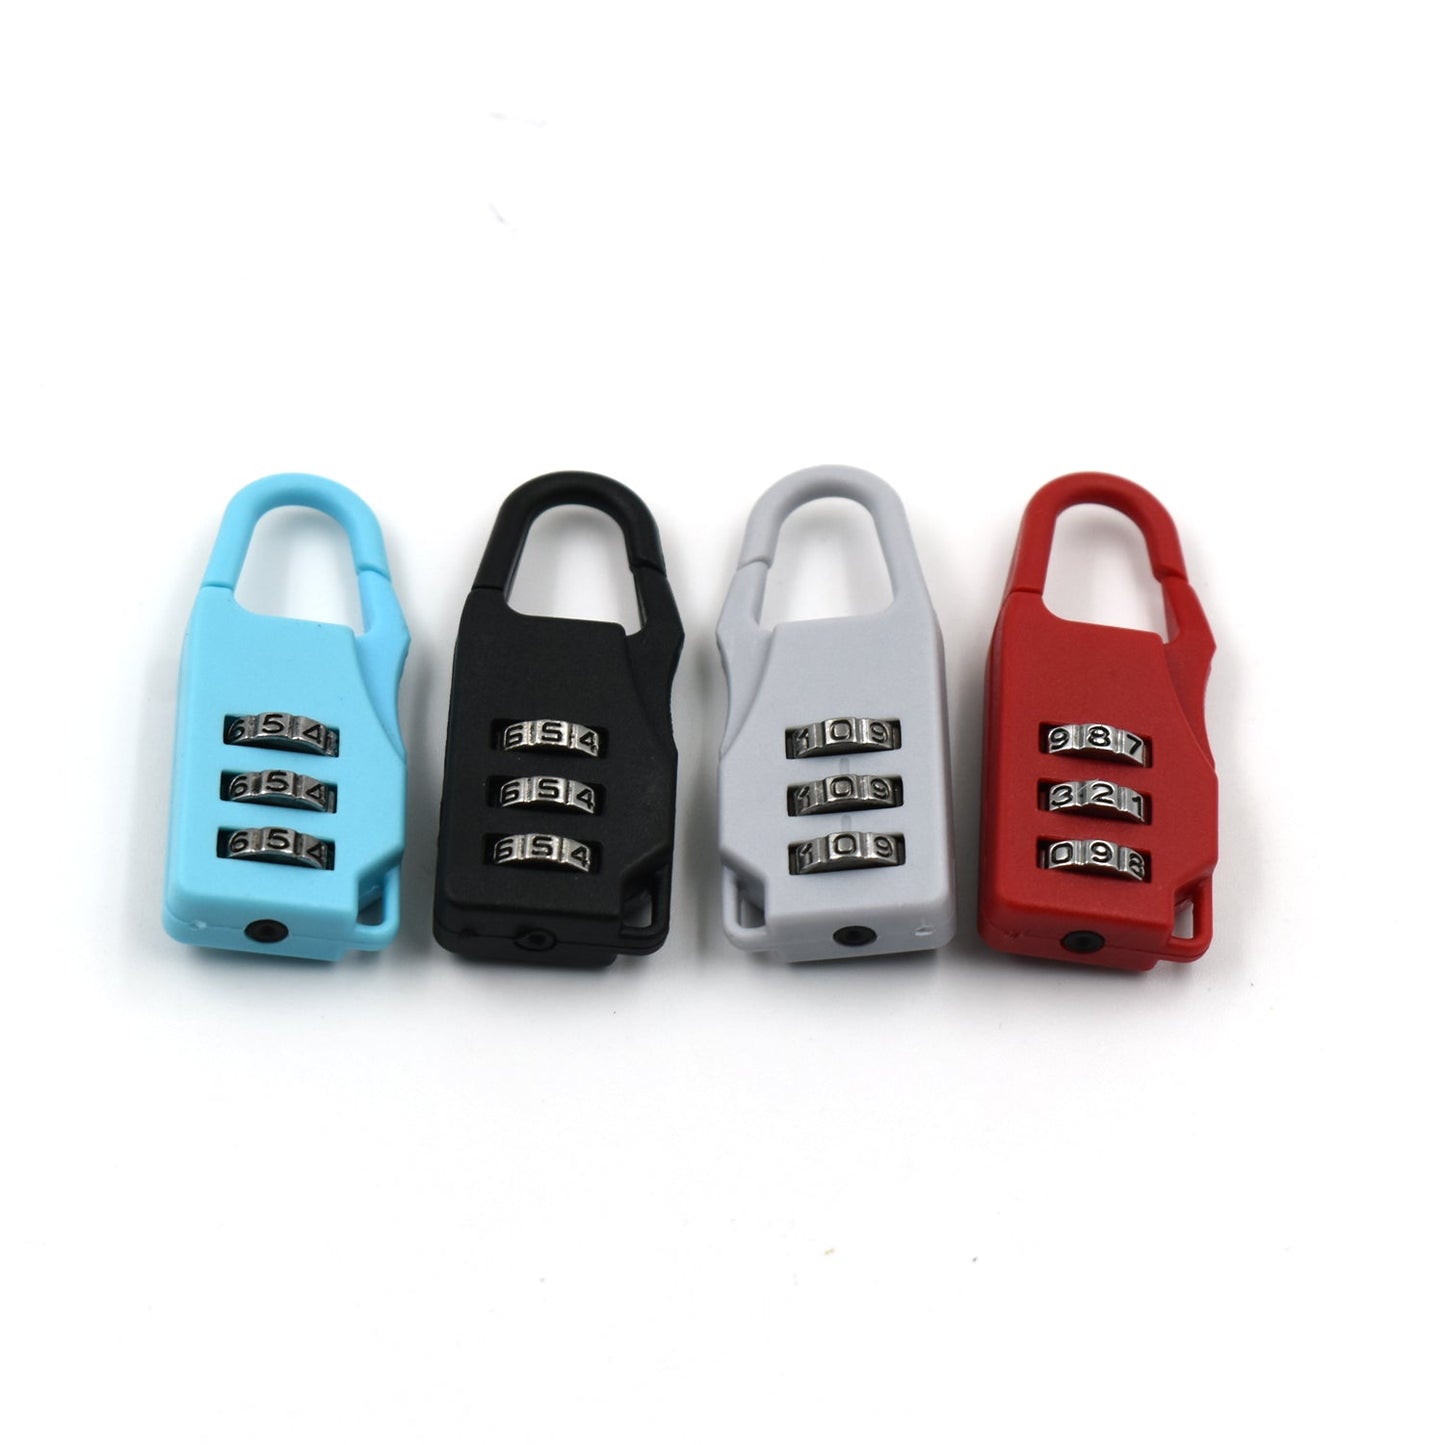 3 Digit luggage Lock and tool used widely in all security purposes of luggage items